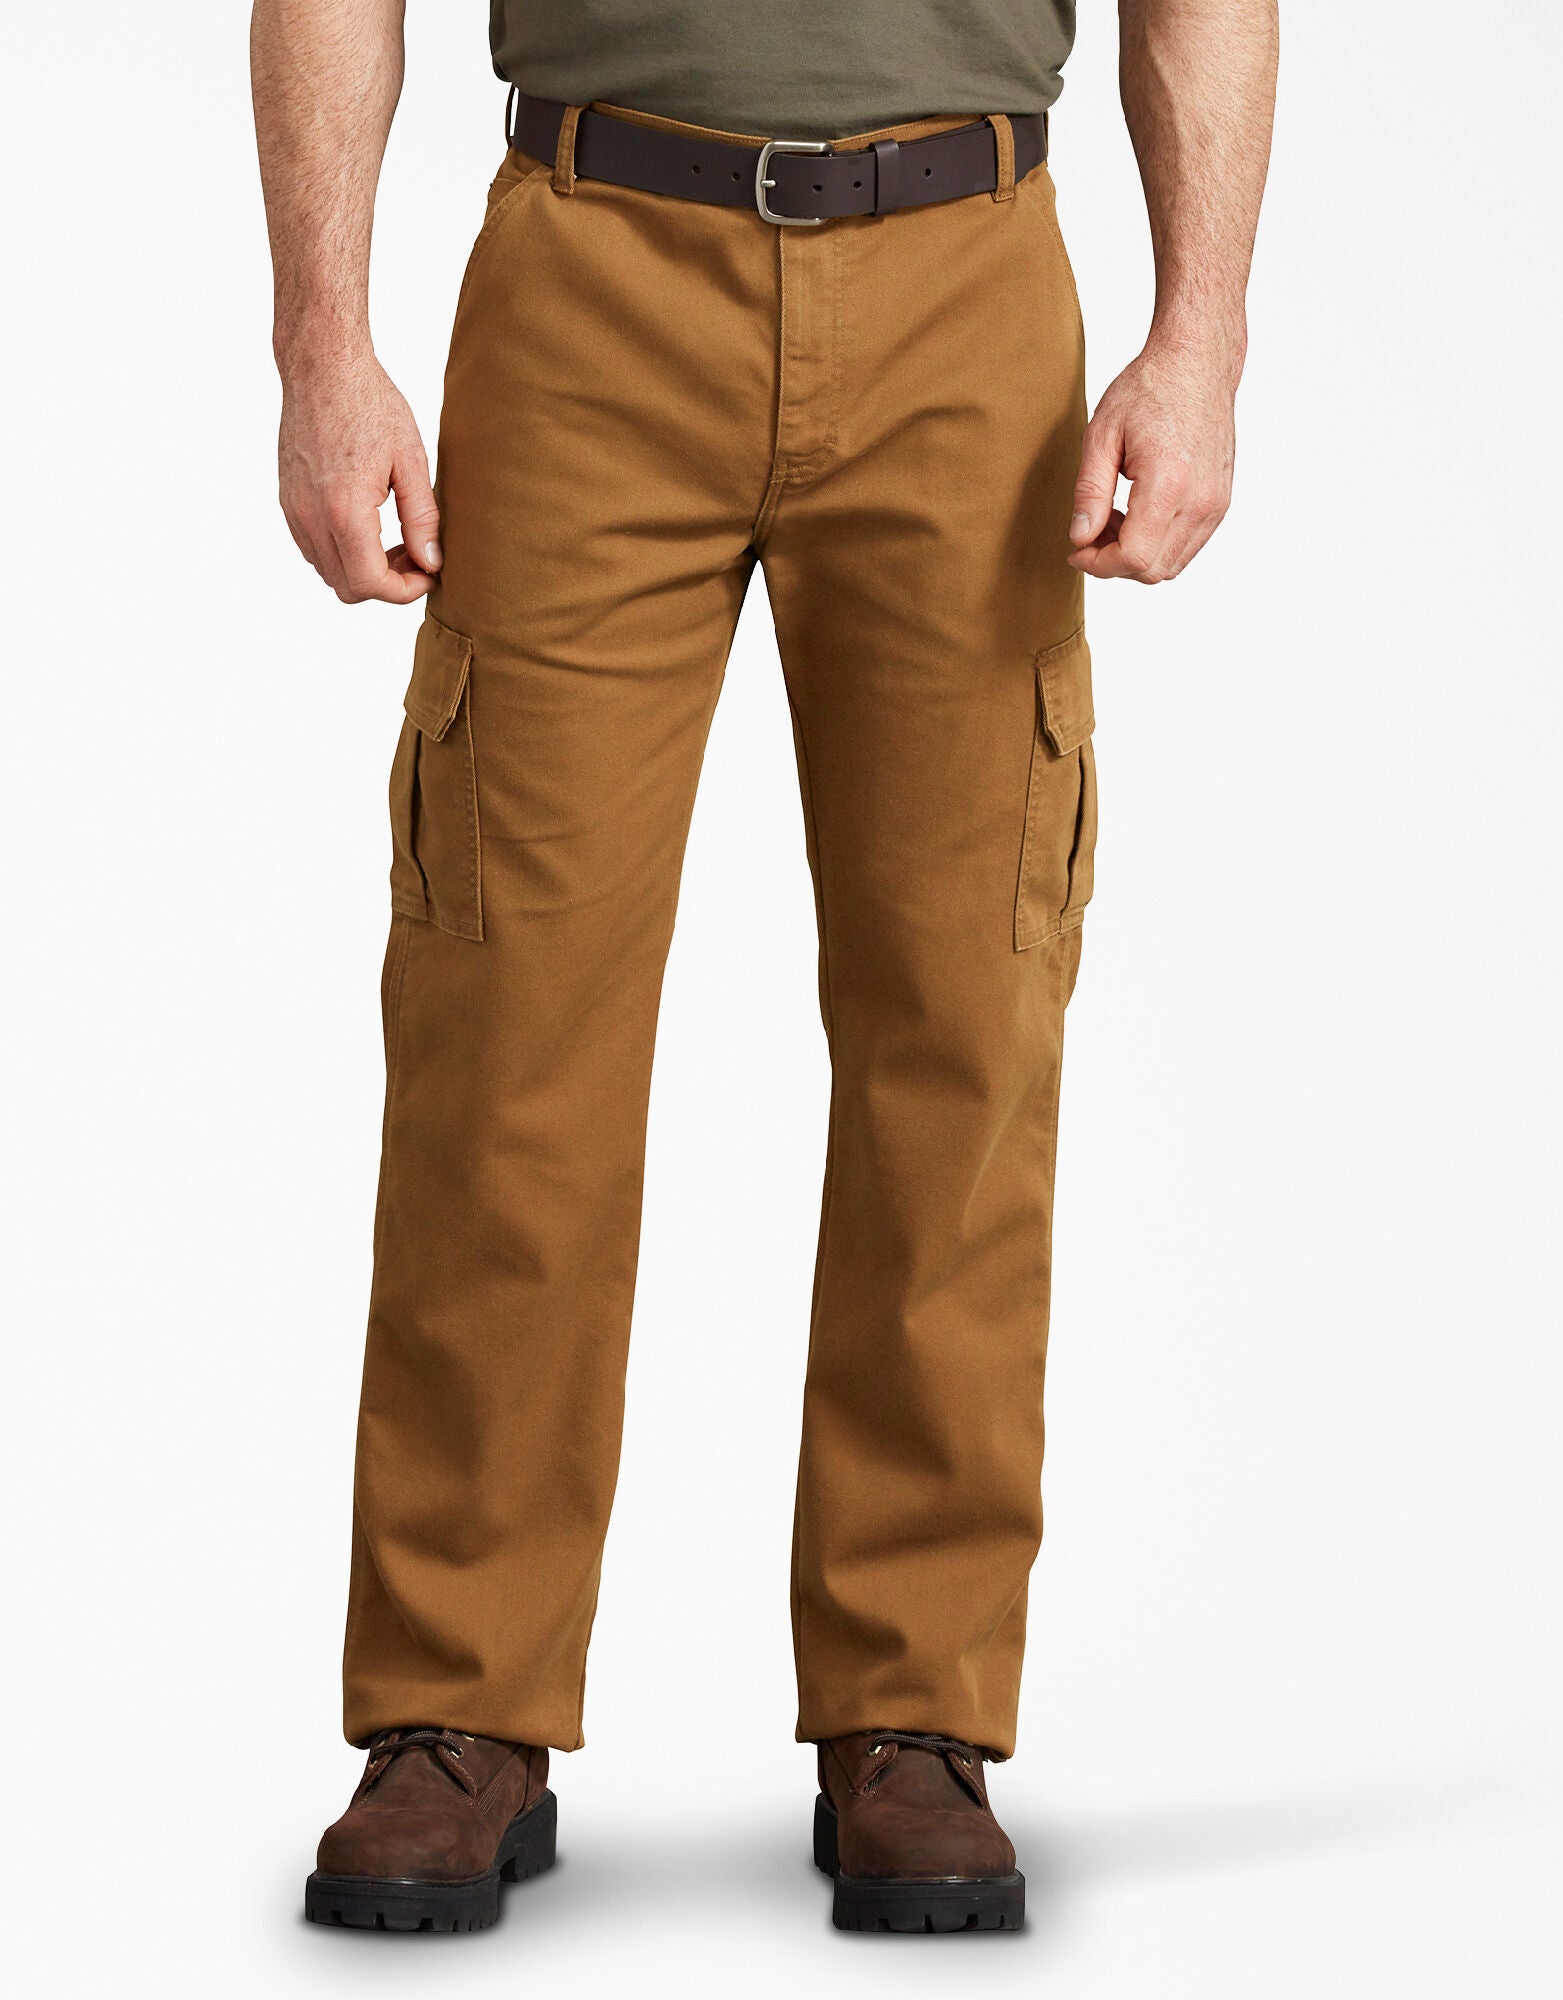 FLEX DuraTech Relaxed Fit Ripstop Cargo Pants  Dickies US